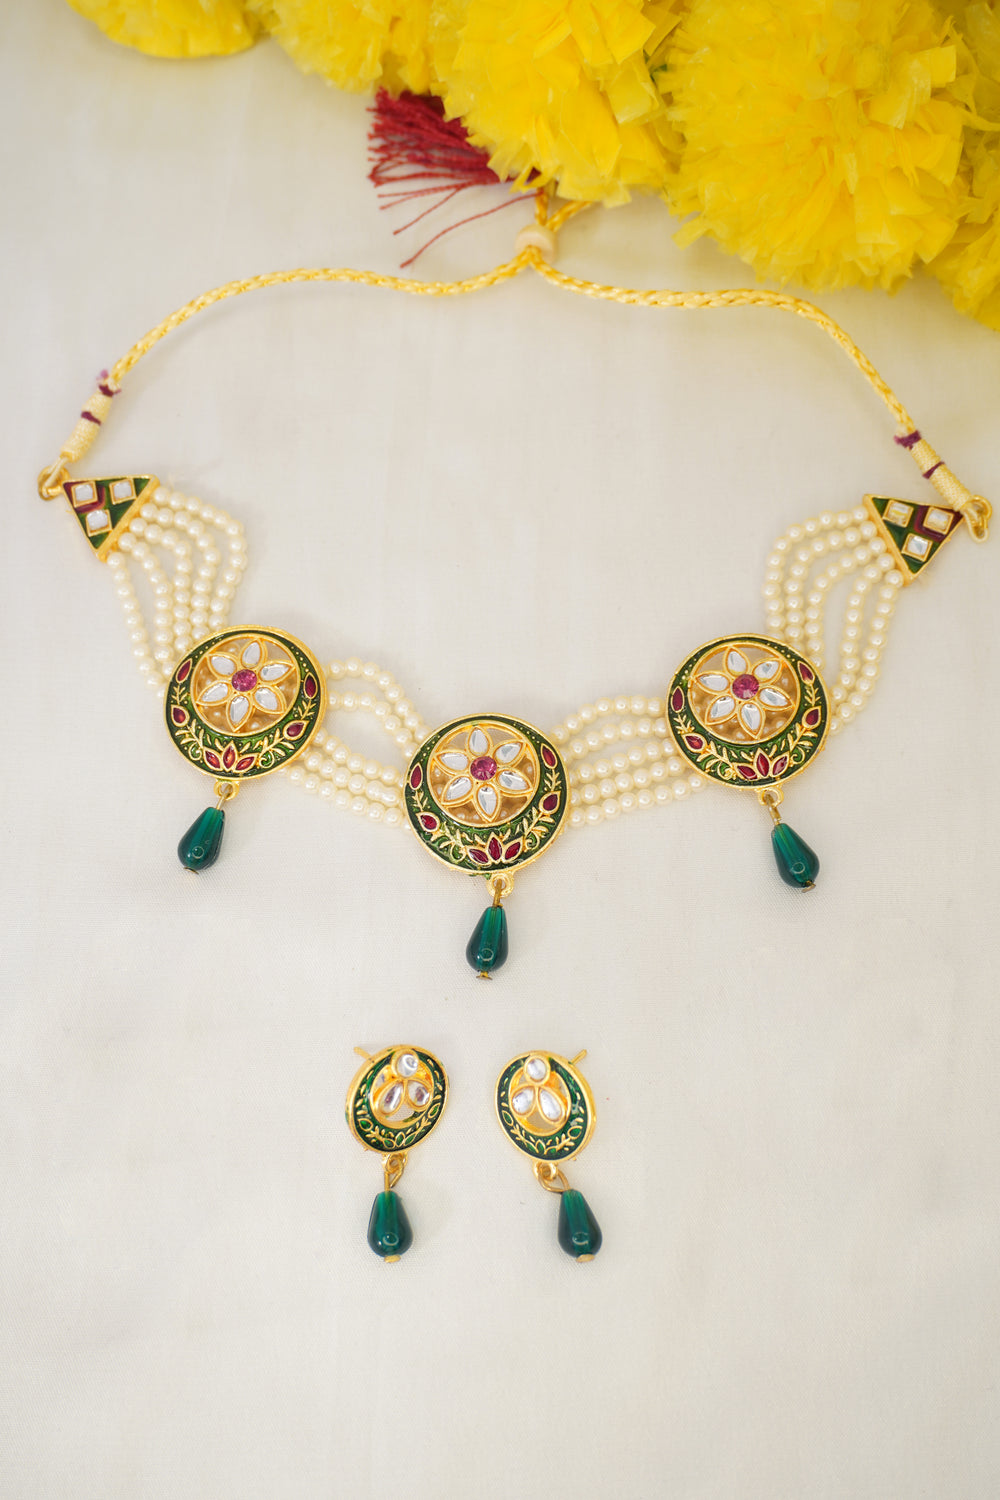 5 Gram Gold Necklace Designs - 10 Latest and Stunning Collection